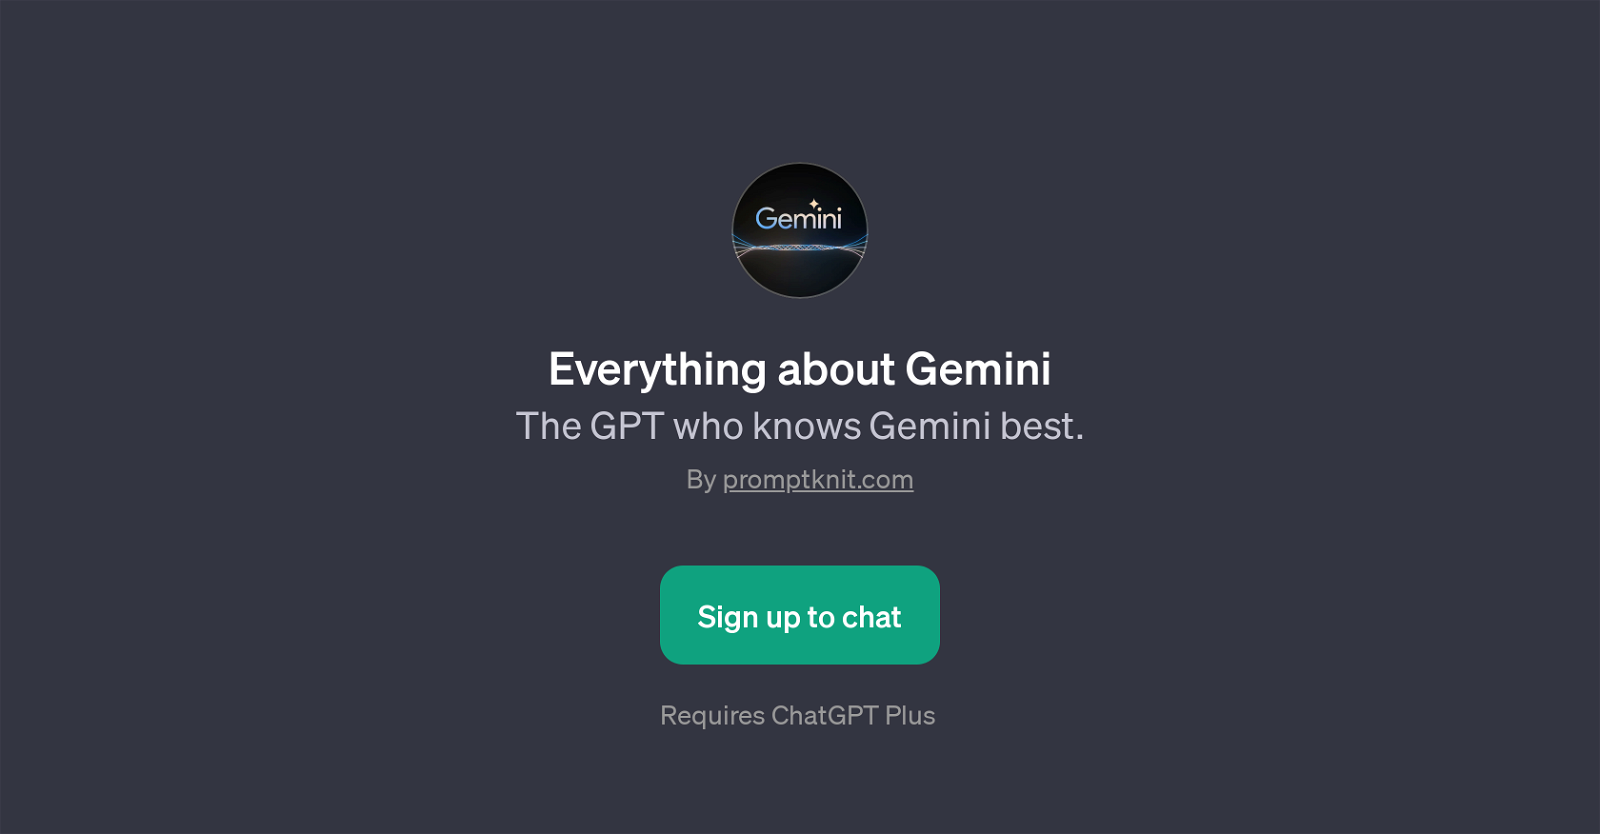 Everything about Gemini website